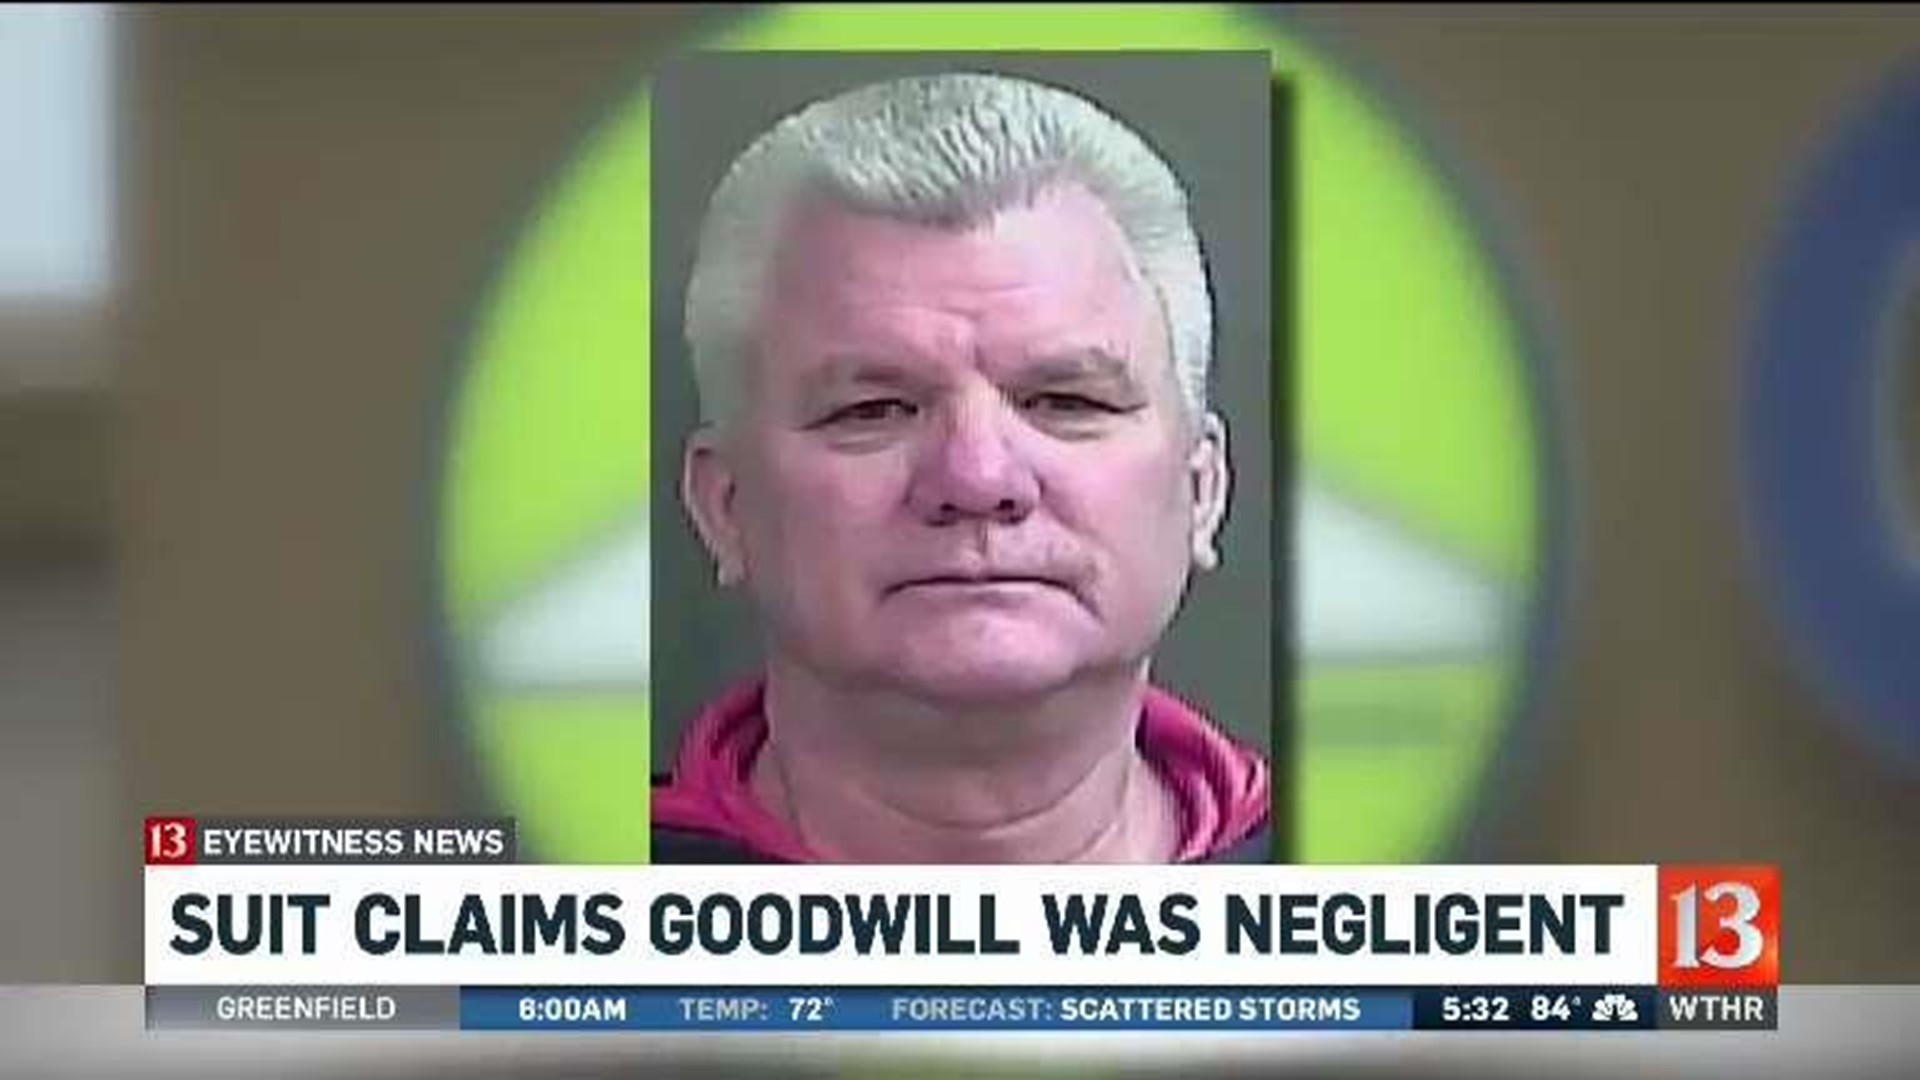 Bfxxii - Fishers' Goodwill employee faced with voyeurism and child pornography  charges | wthr.com